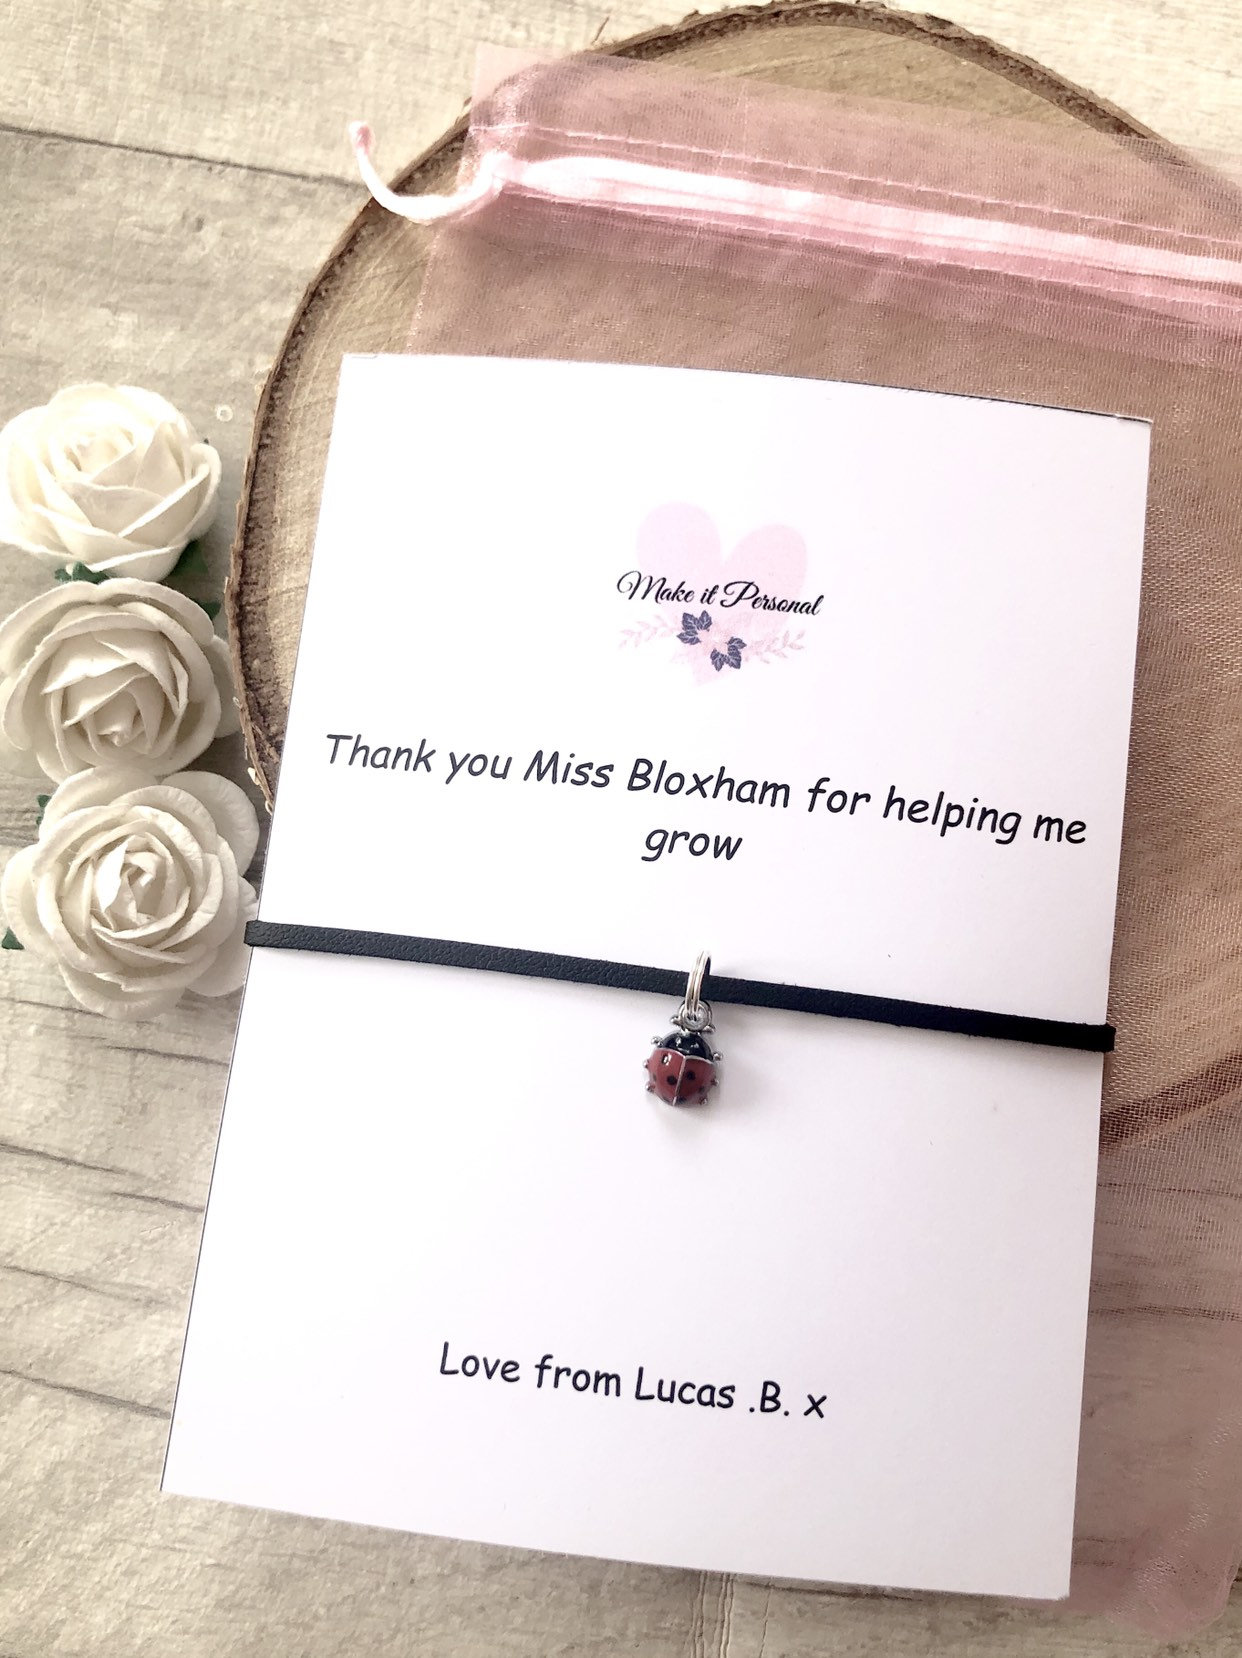 Thank you for helping me grow, teacher gifts, wish bracelet, childminder, personalized, nursery gift, teaching assistant gift, ladybird